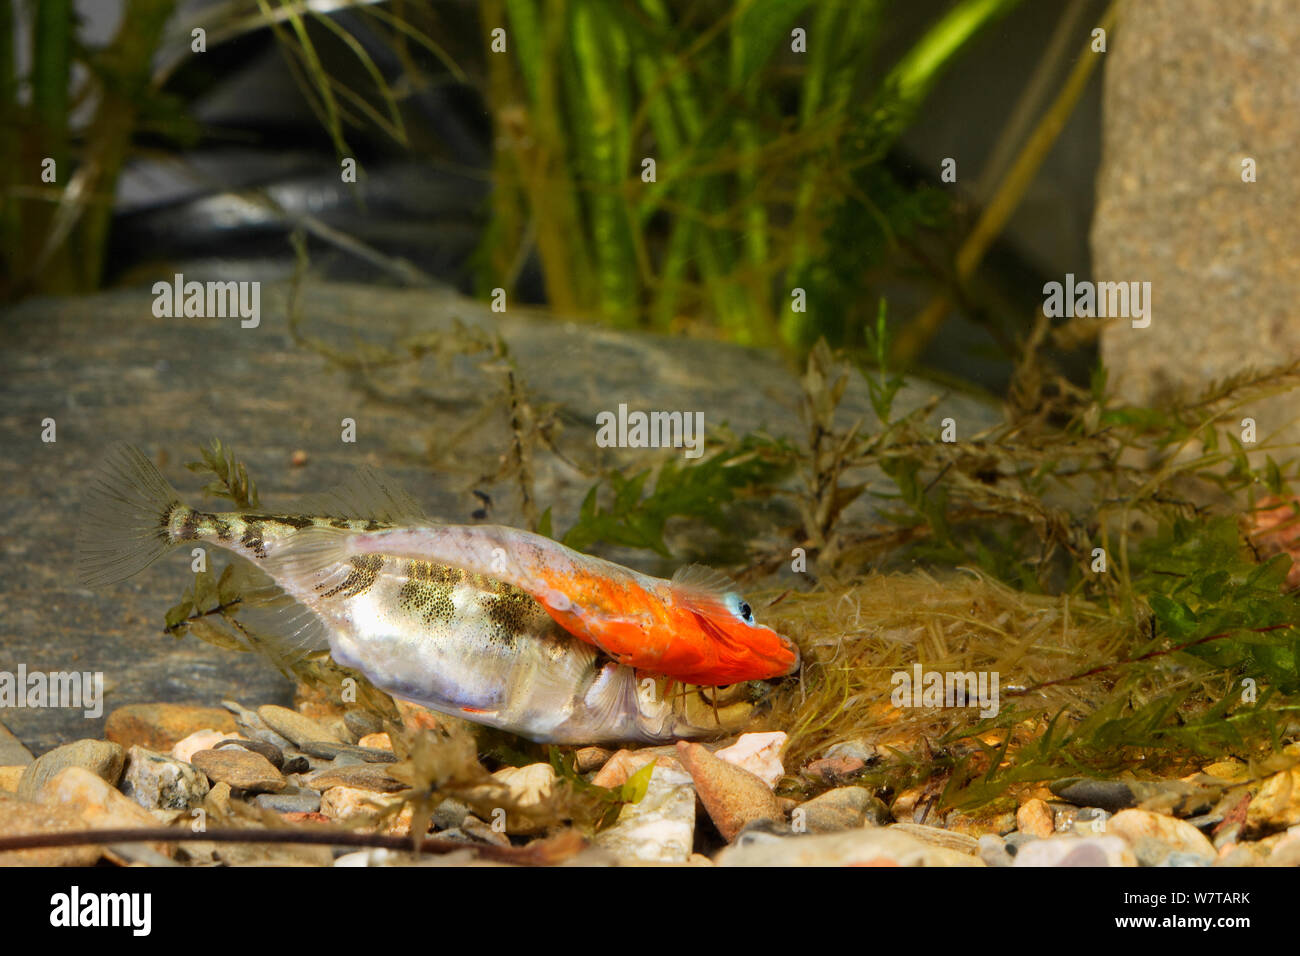 Three-spined stickleback (Gasterosteus aculeatus), male with female laying eggs in the nest, Espai Natural Les Gavarres, Baix Emporda, Catalonia, Spain, captive. Stock Photo